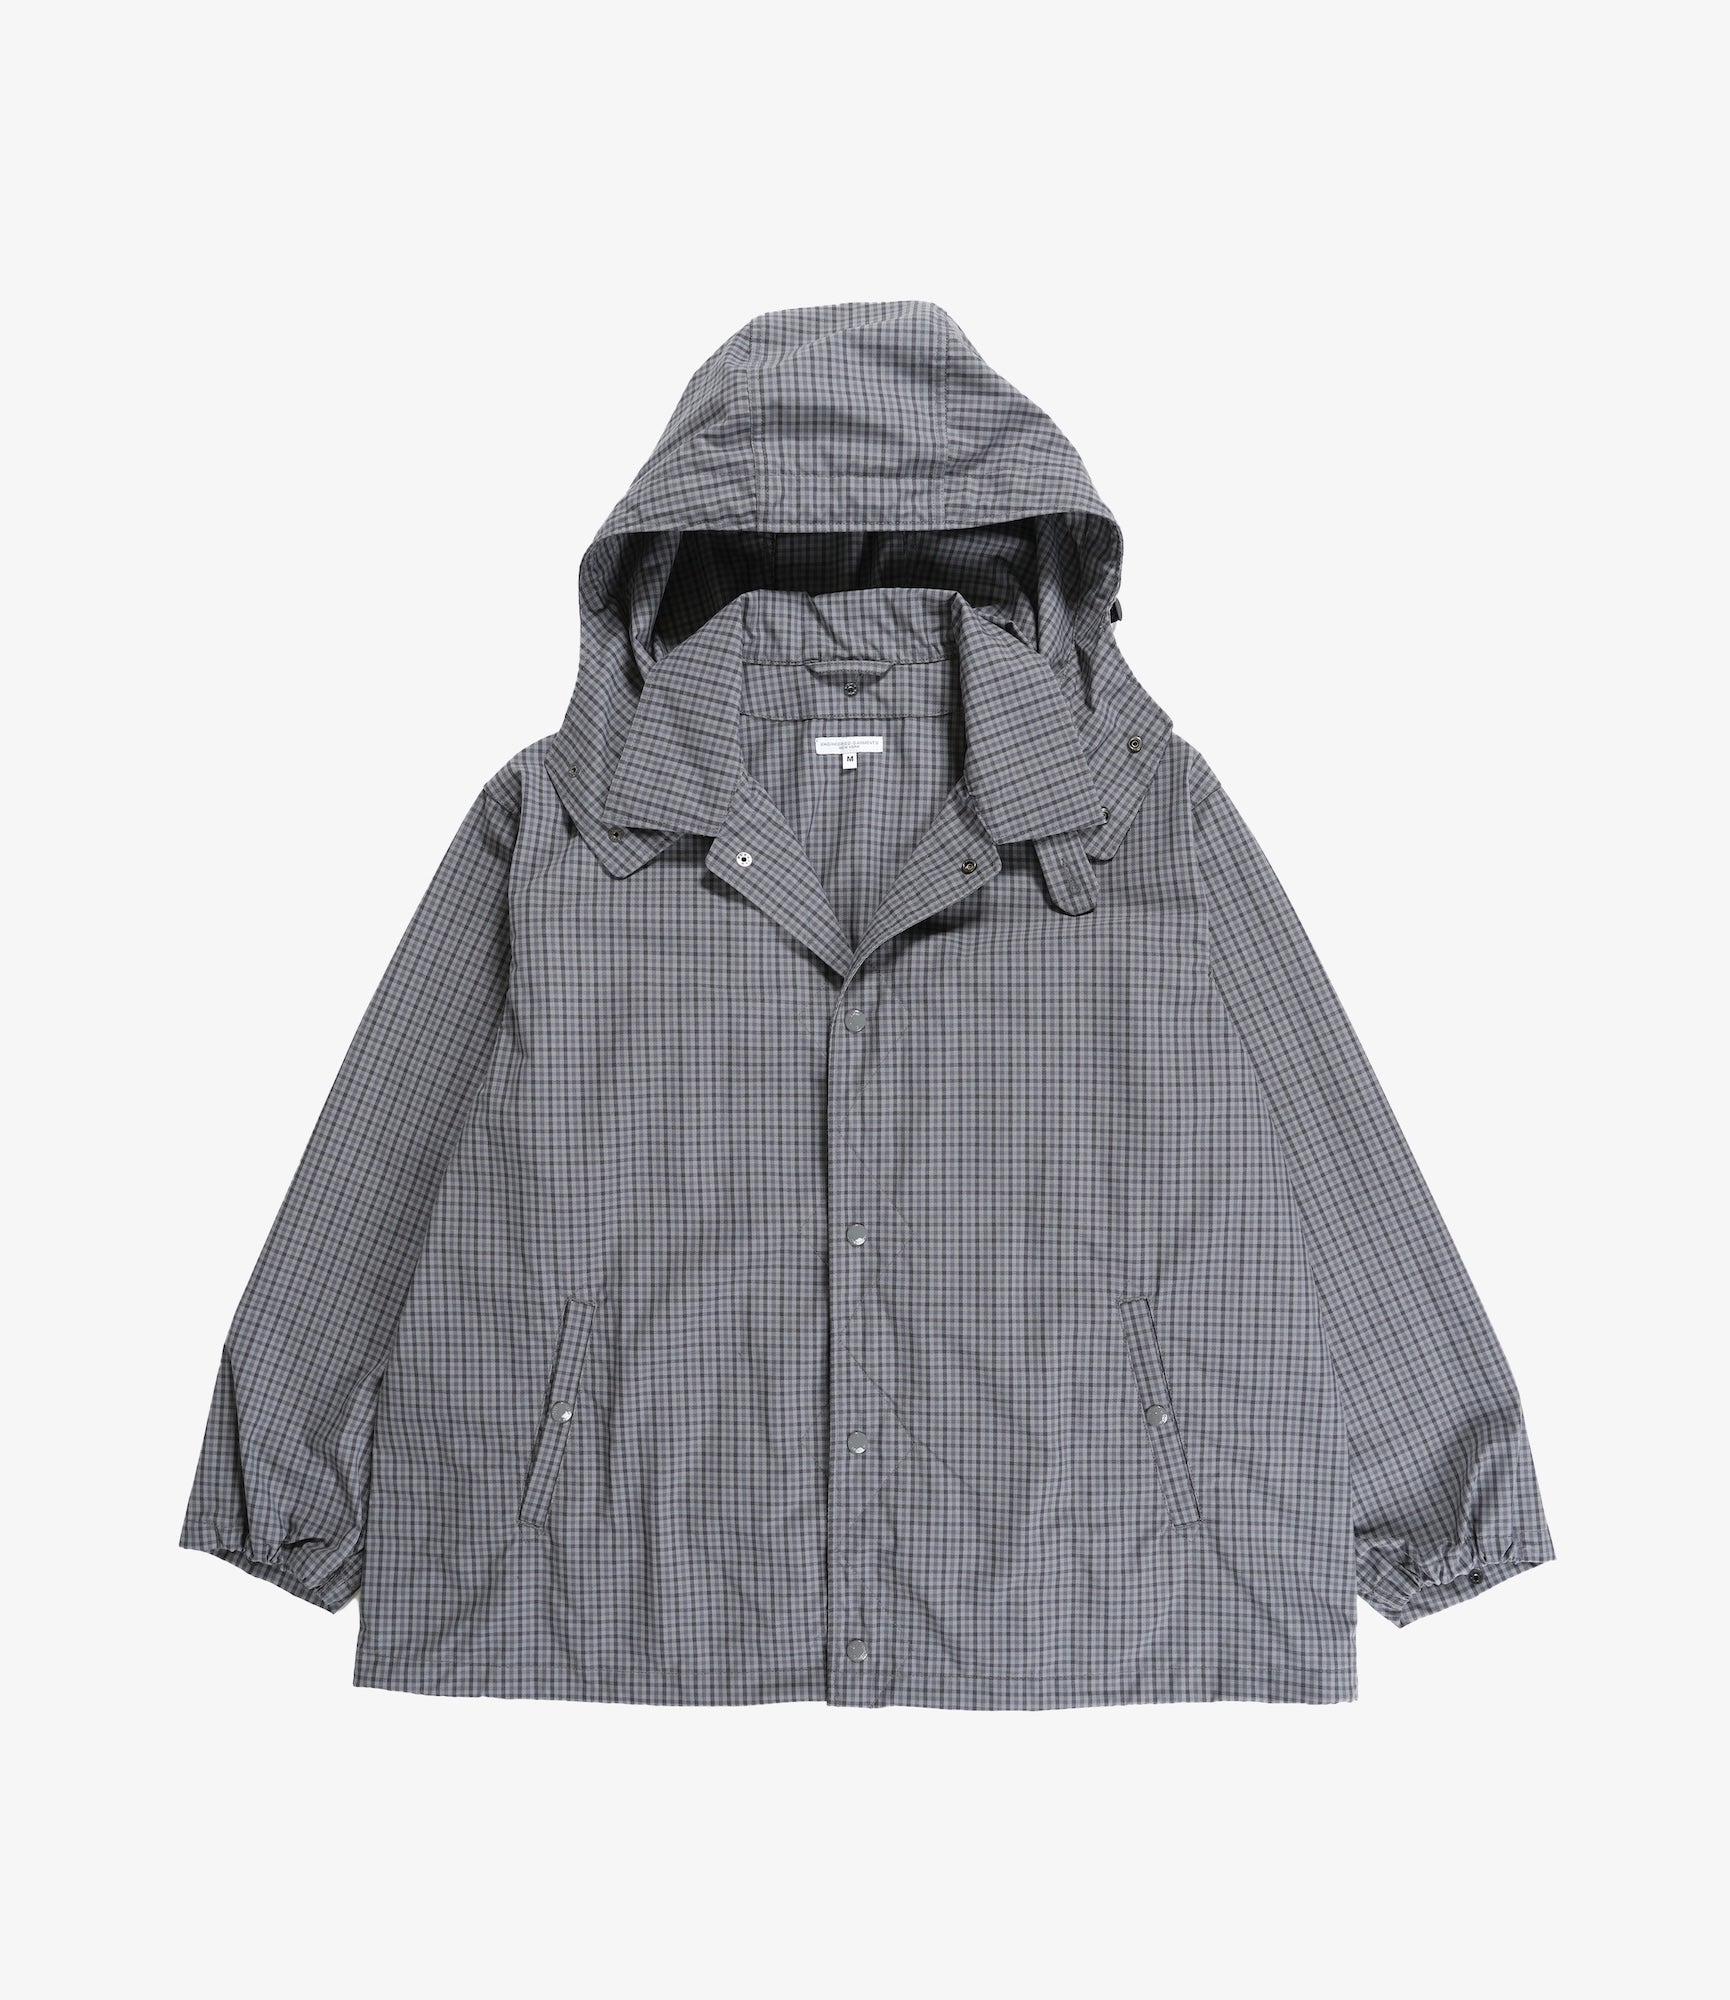 Outerwear | Nepenthes London